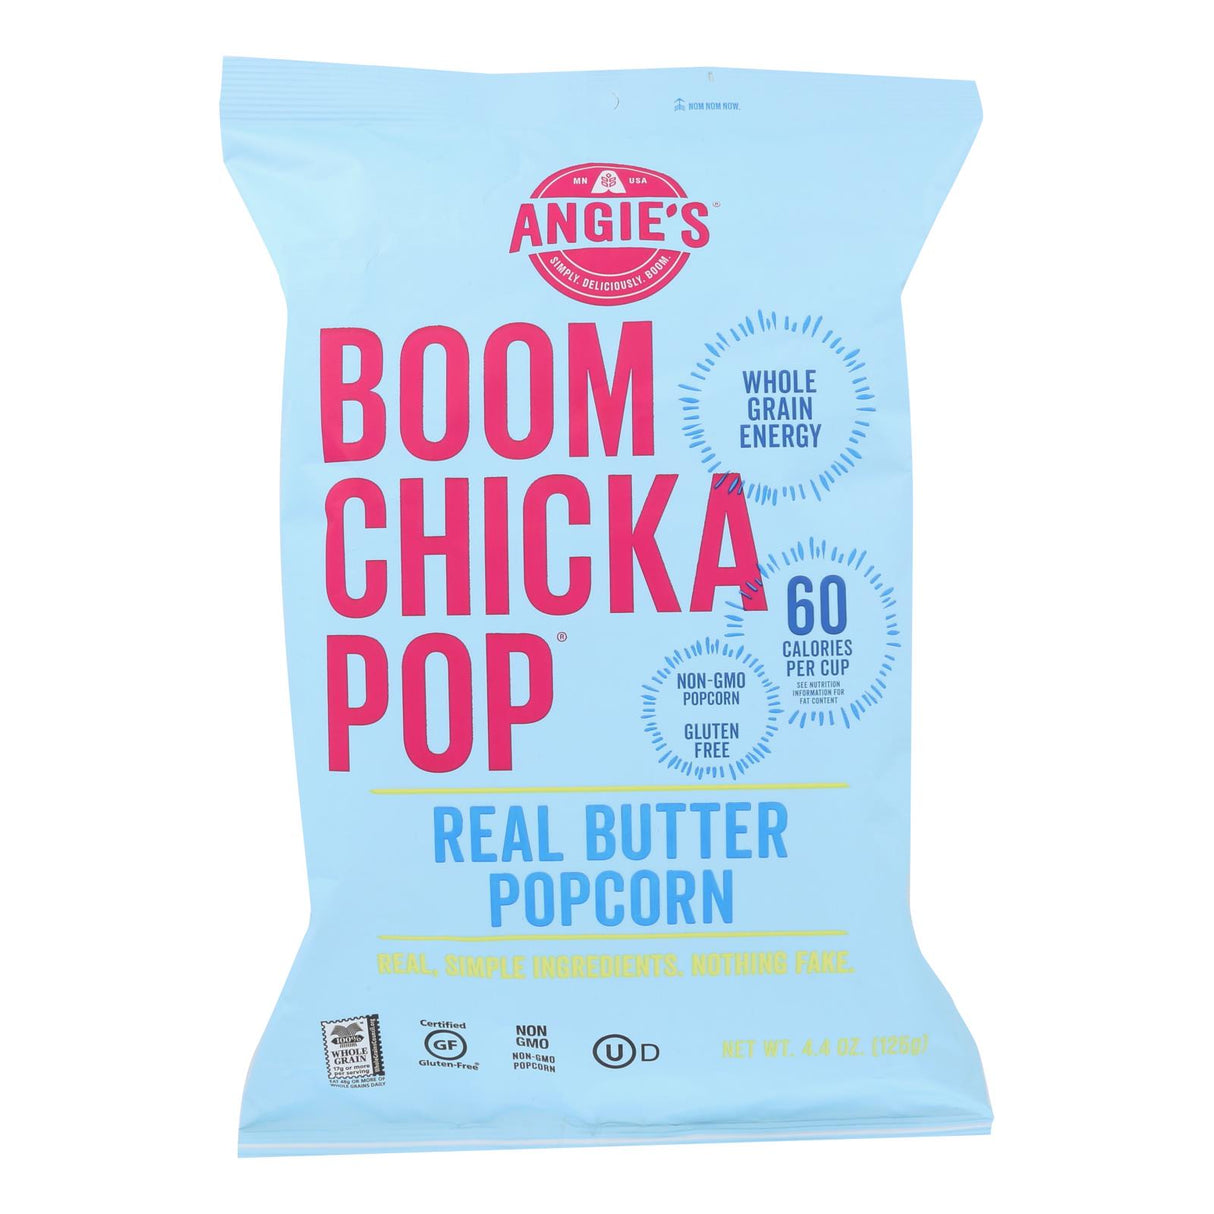 Angie's Kettle Corn Popcorn - Boom Chicka Pop - Real Butter - 4.4 Oz - Pack of 12 - Cozy Farm 